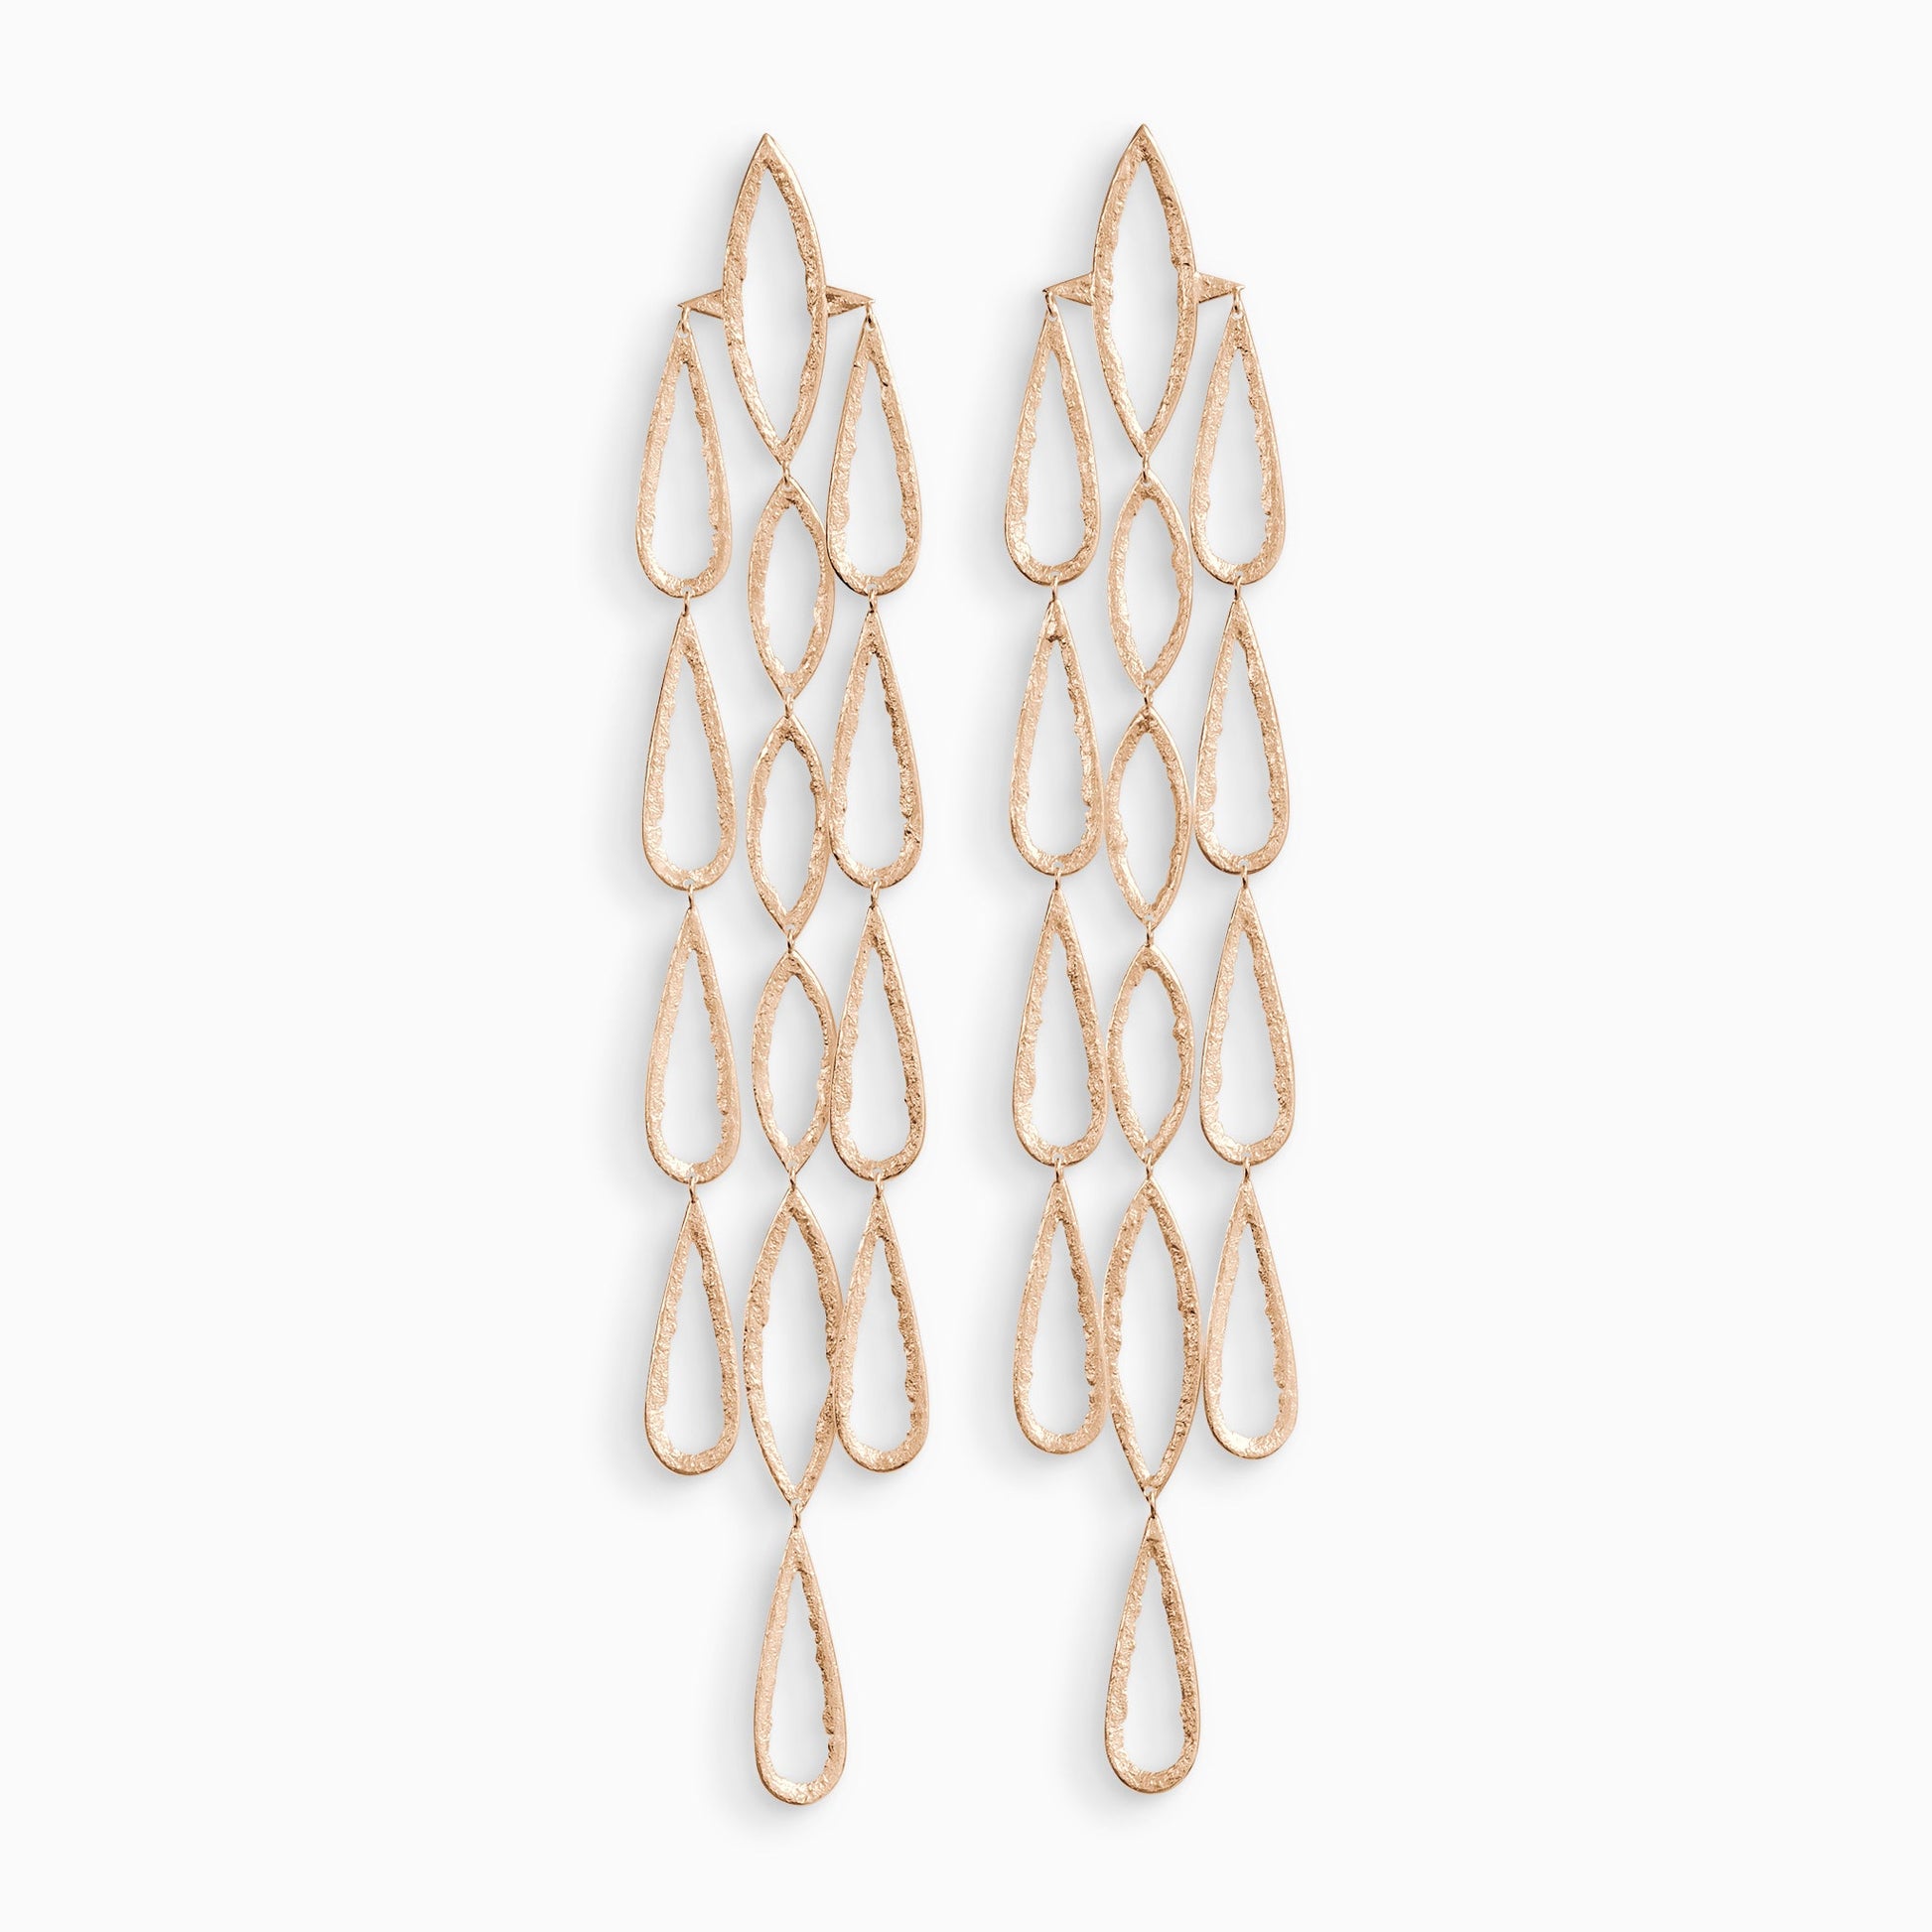 A pair of 18ct Fairtrade rose  gold drop earrings. 3 parallel lines of articulating large teardrop shapes hang from a large lozenge shapes with a stud ear fastening . These open shapes have a strong organic texture and are smooth on the outside edges with fragmented inside edges. 192mm length. 32mm width.